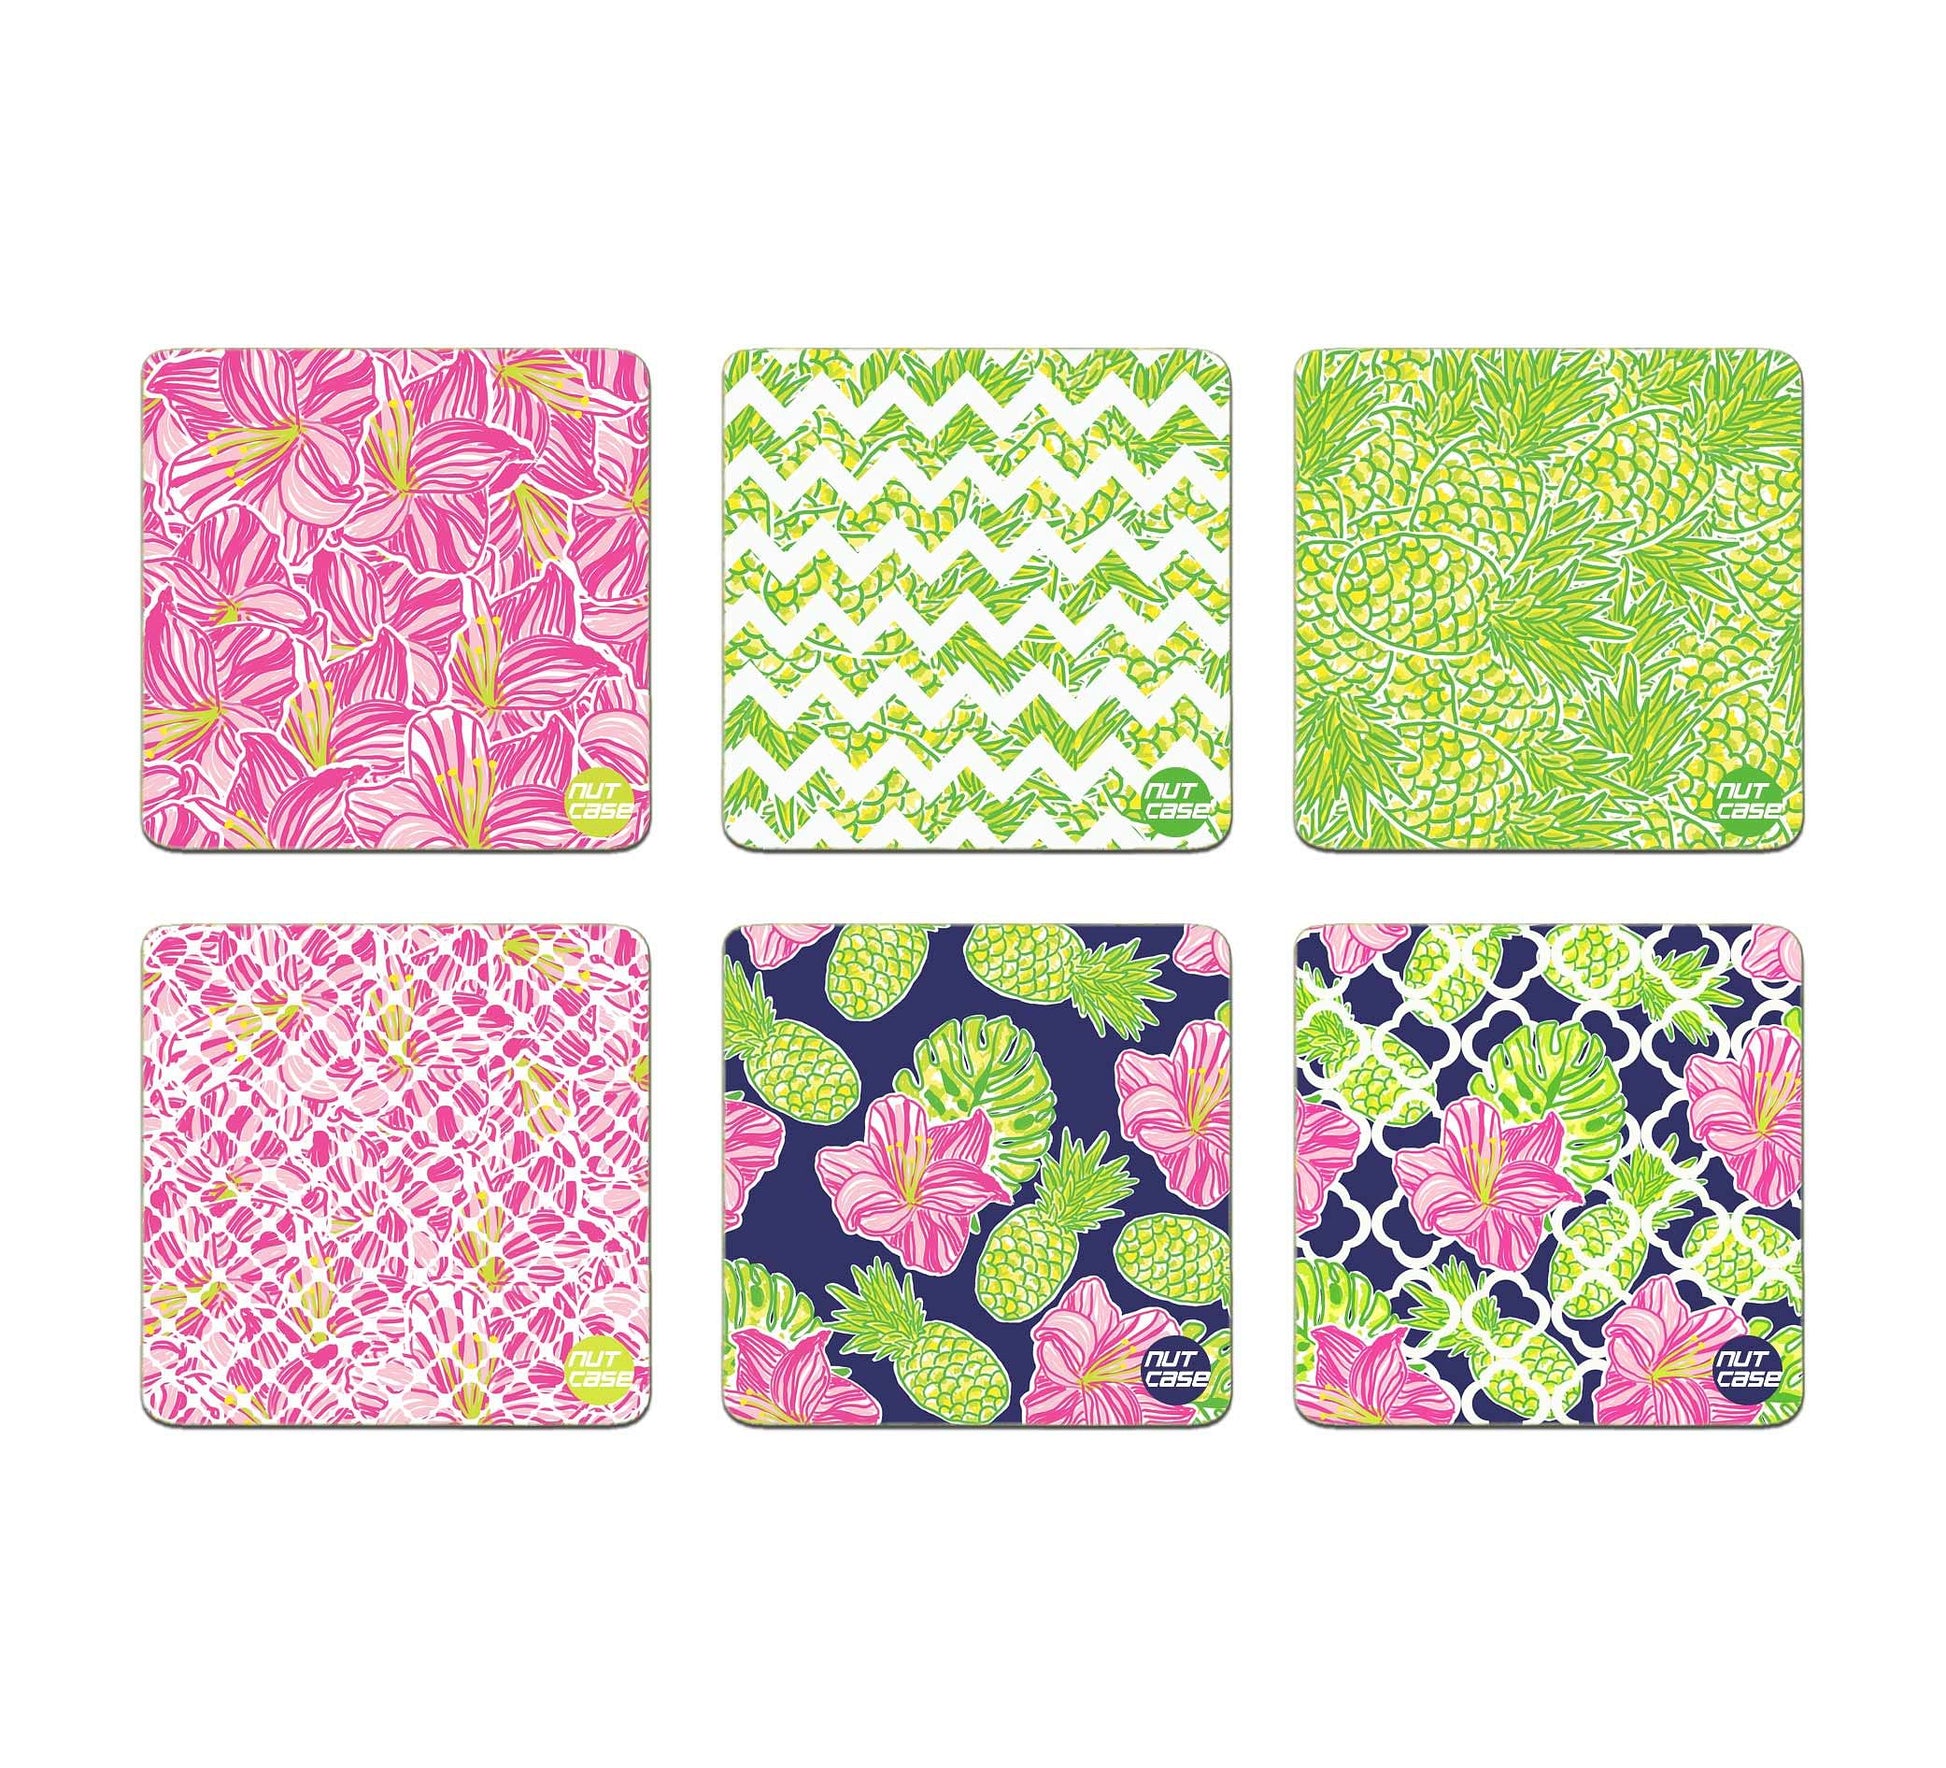 Metal Printed Coasters Pack of 6 for Home & Office Use - Pineapples Nutcase